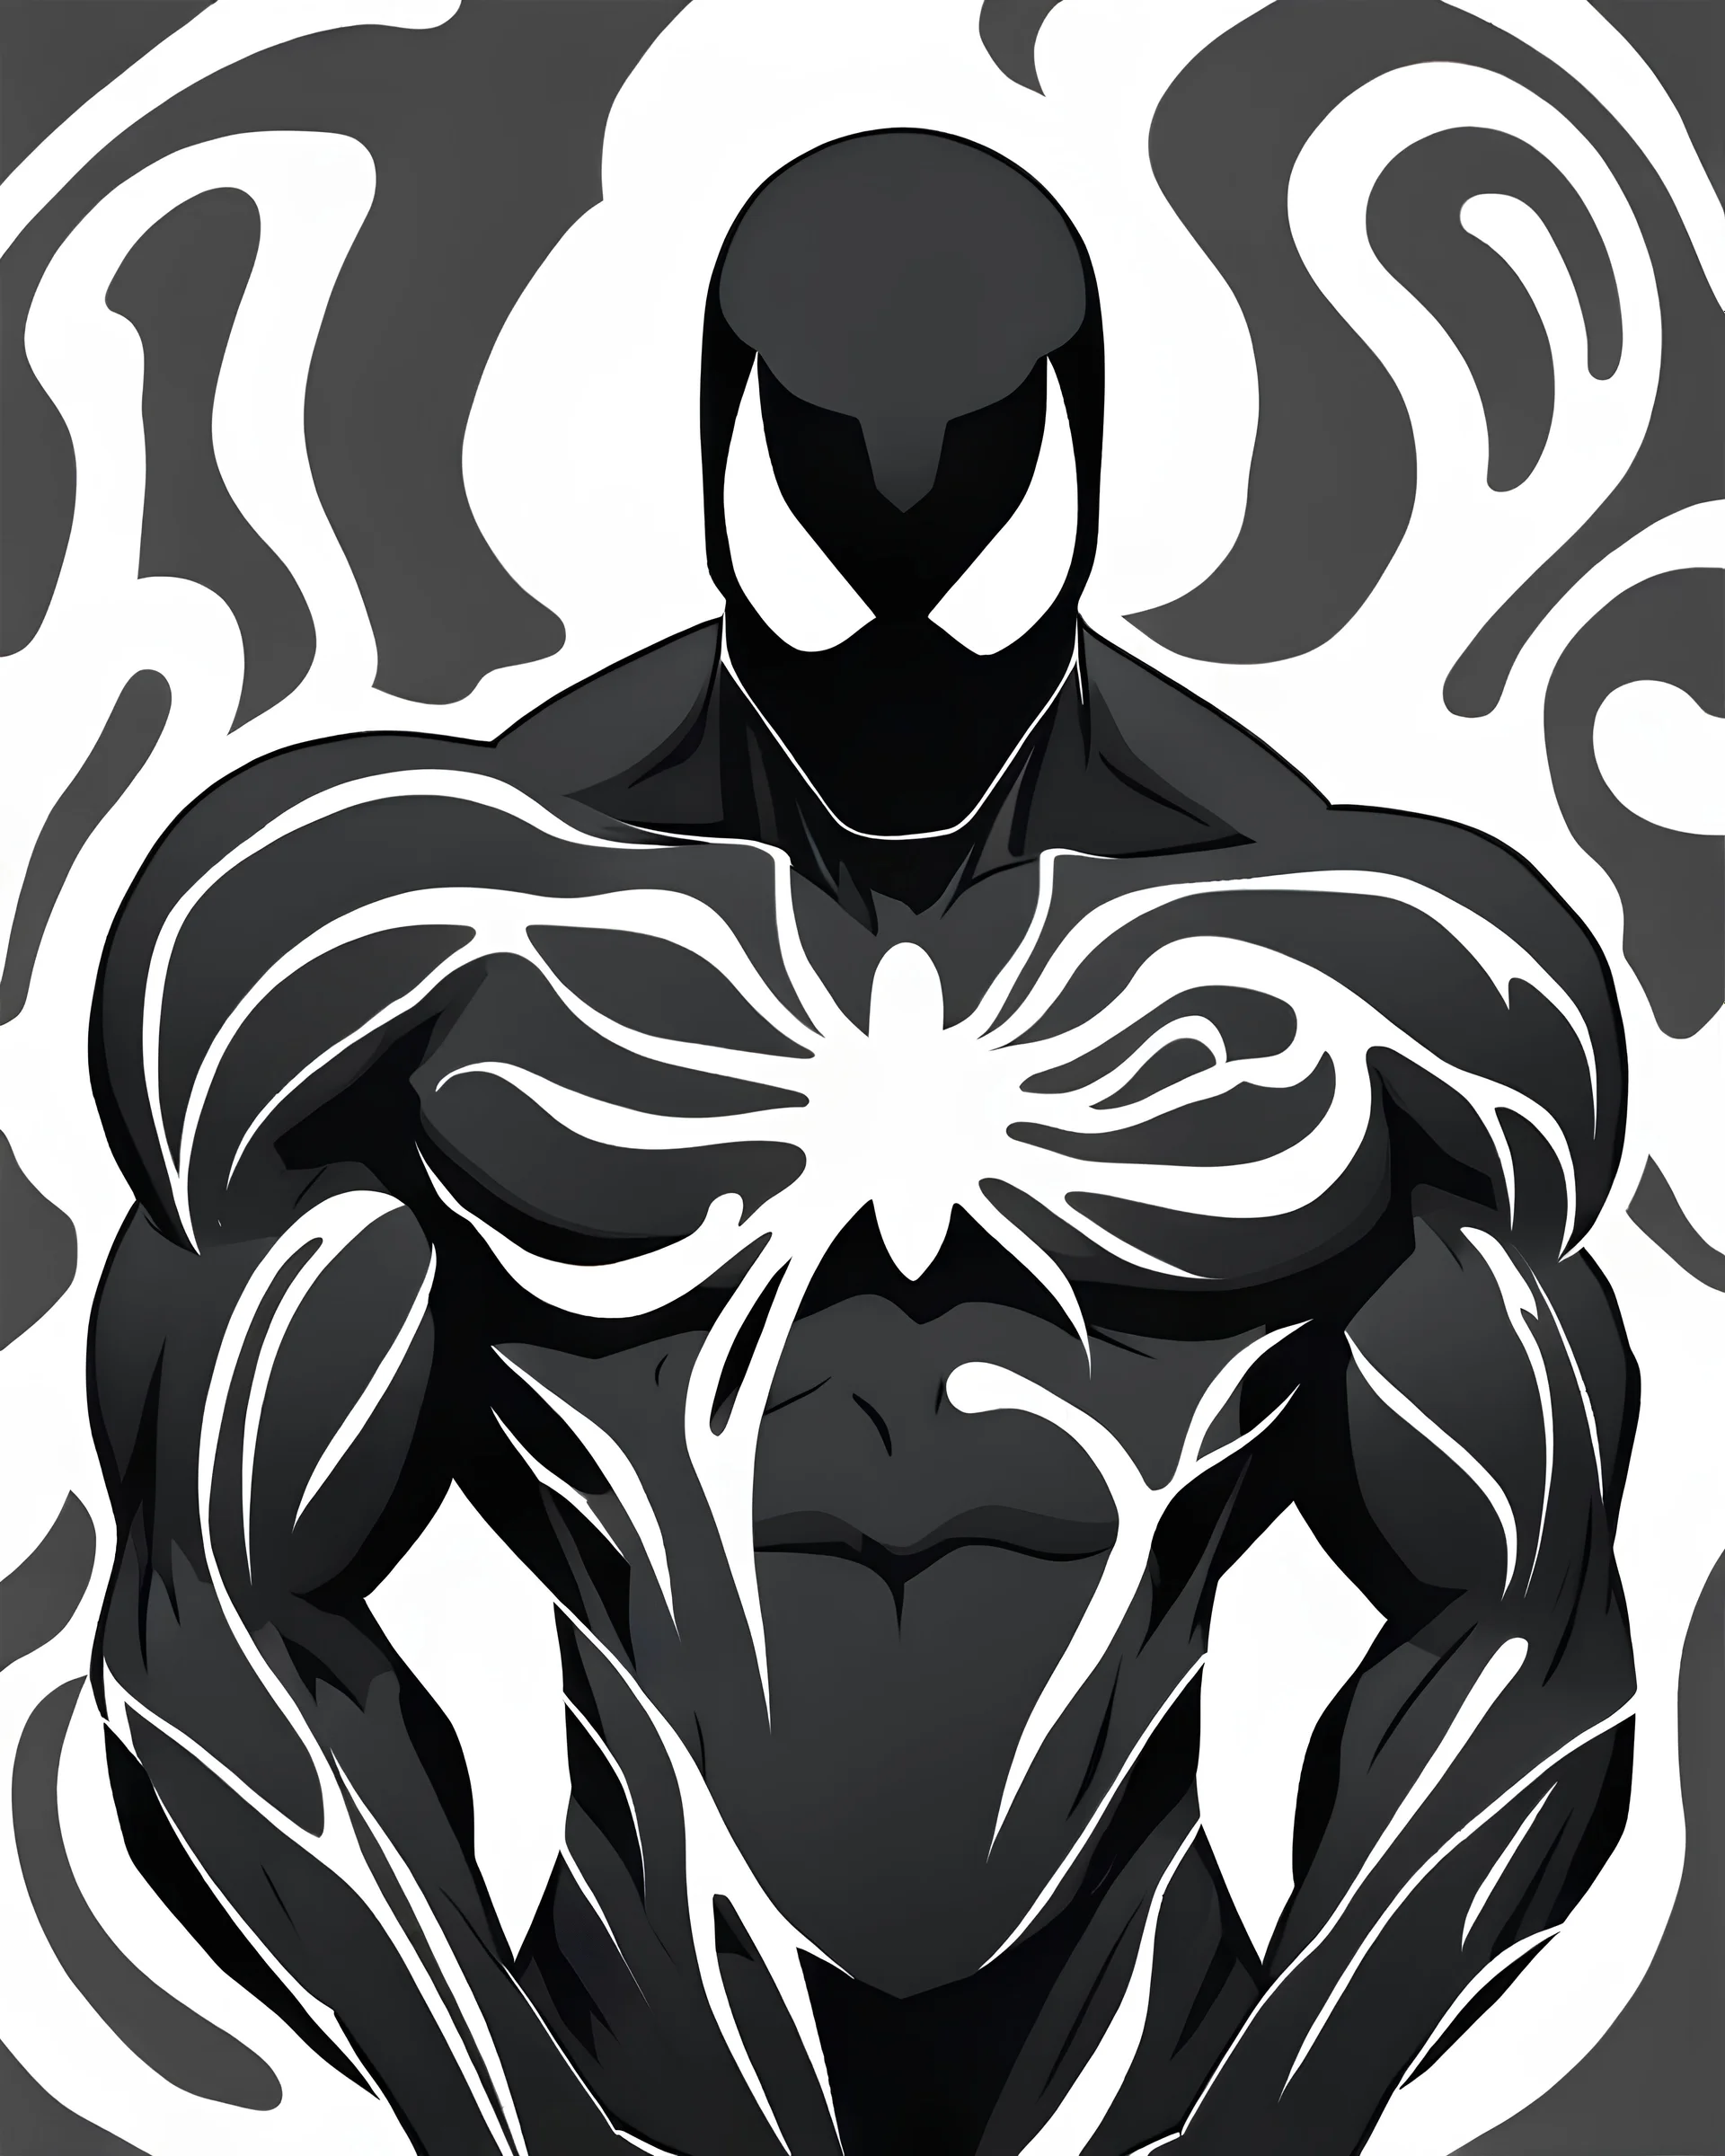 High Quality Illustration of a dark gray Marvel Symbiote has swirl an large x on chest